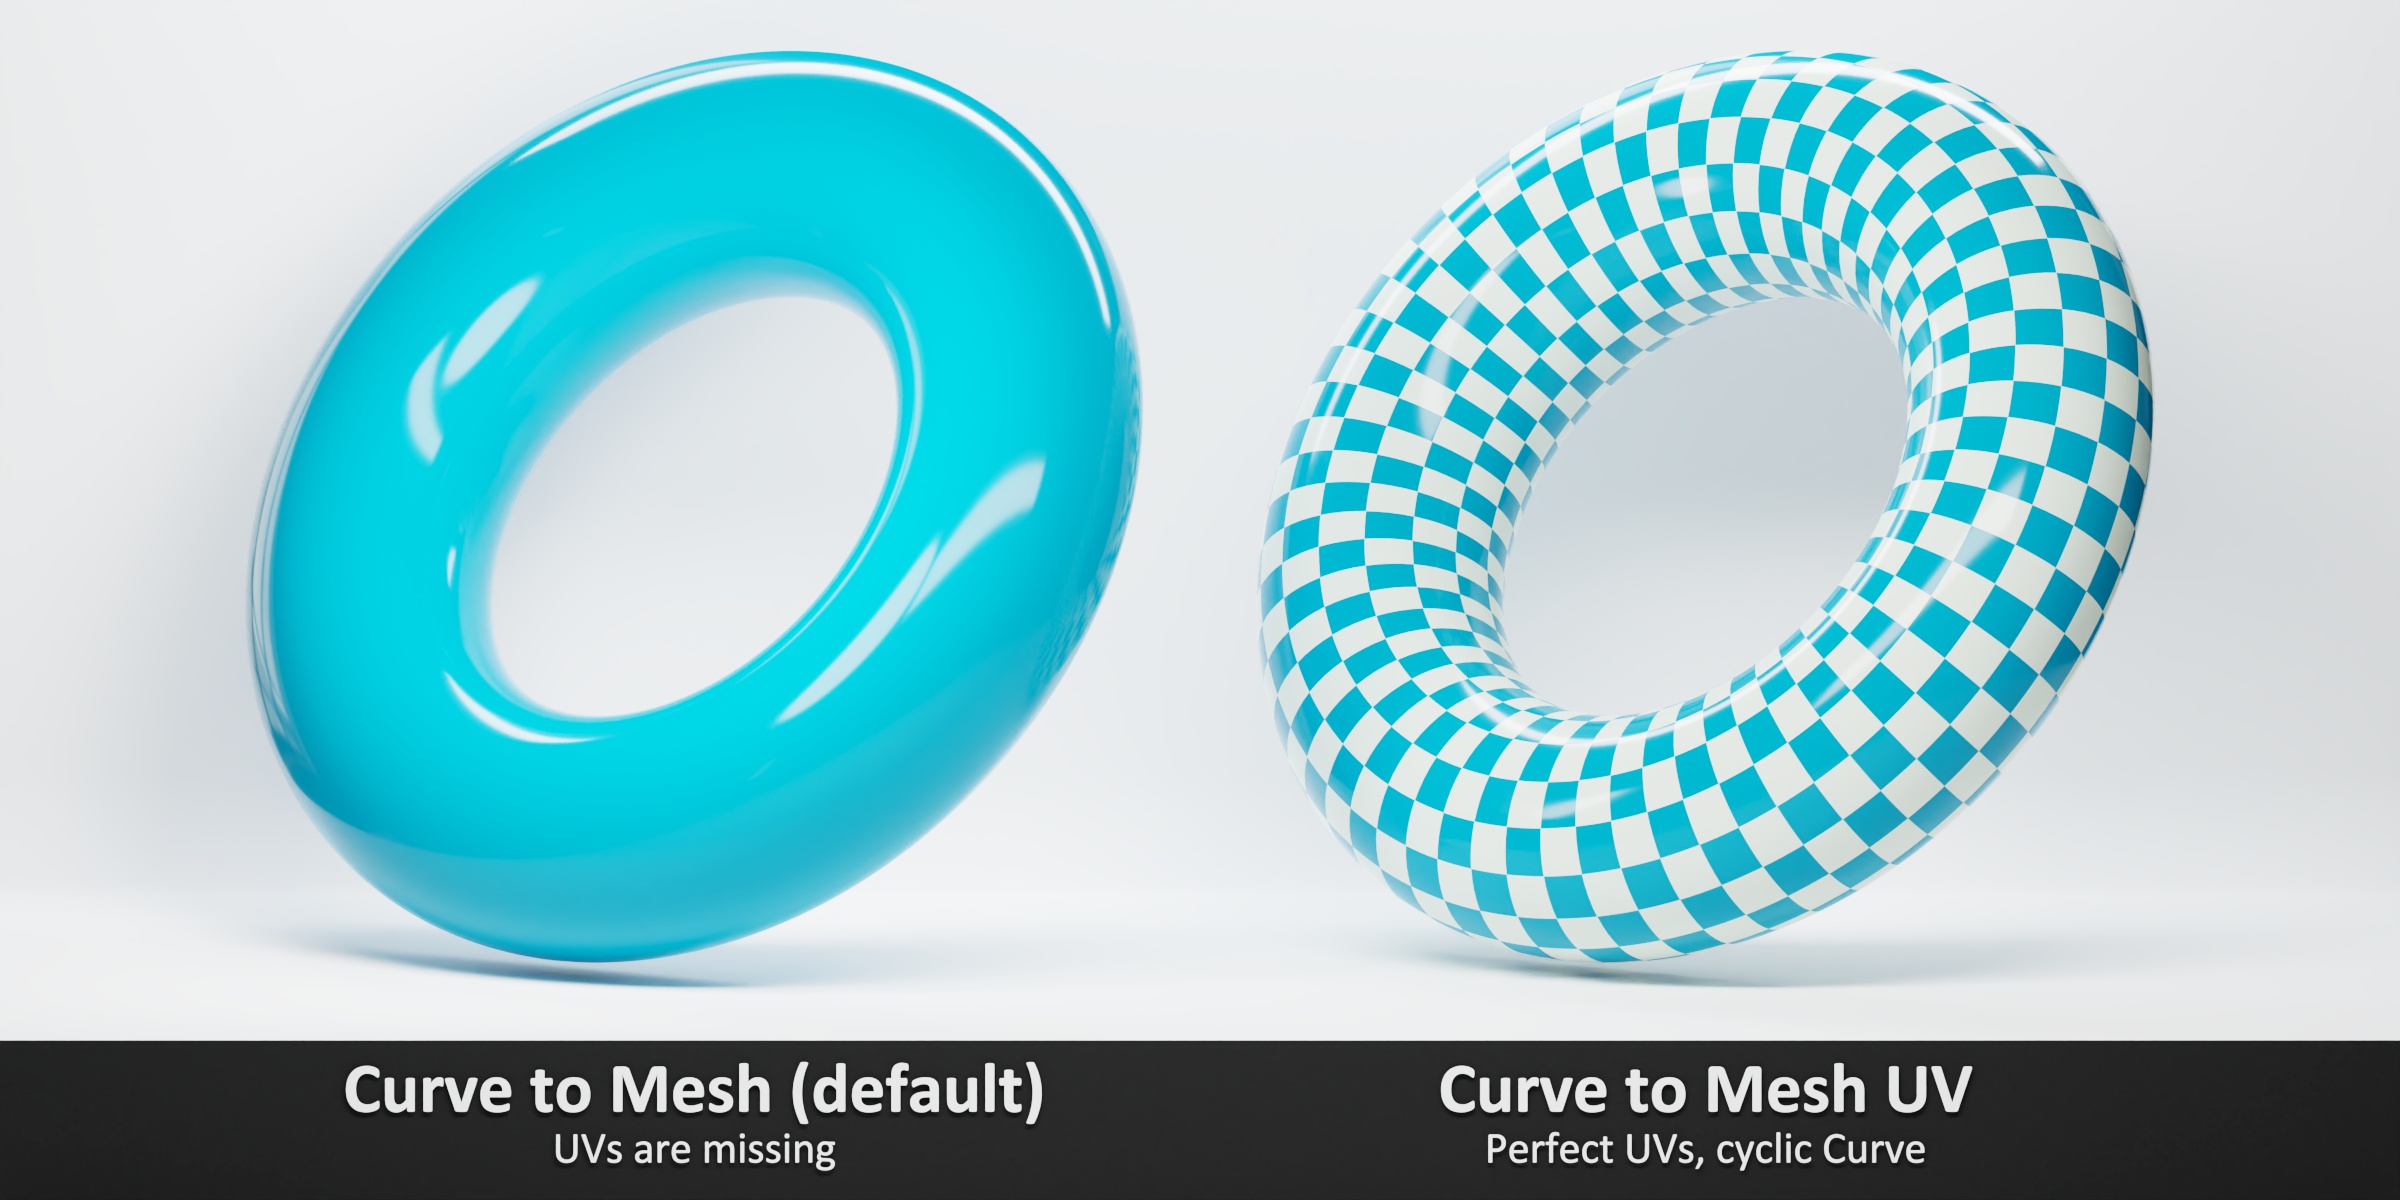 _images/curve-to-mesh_002.jpg